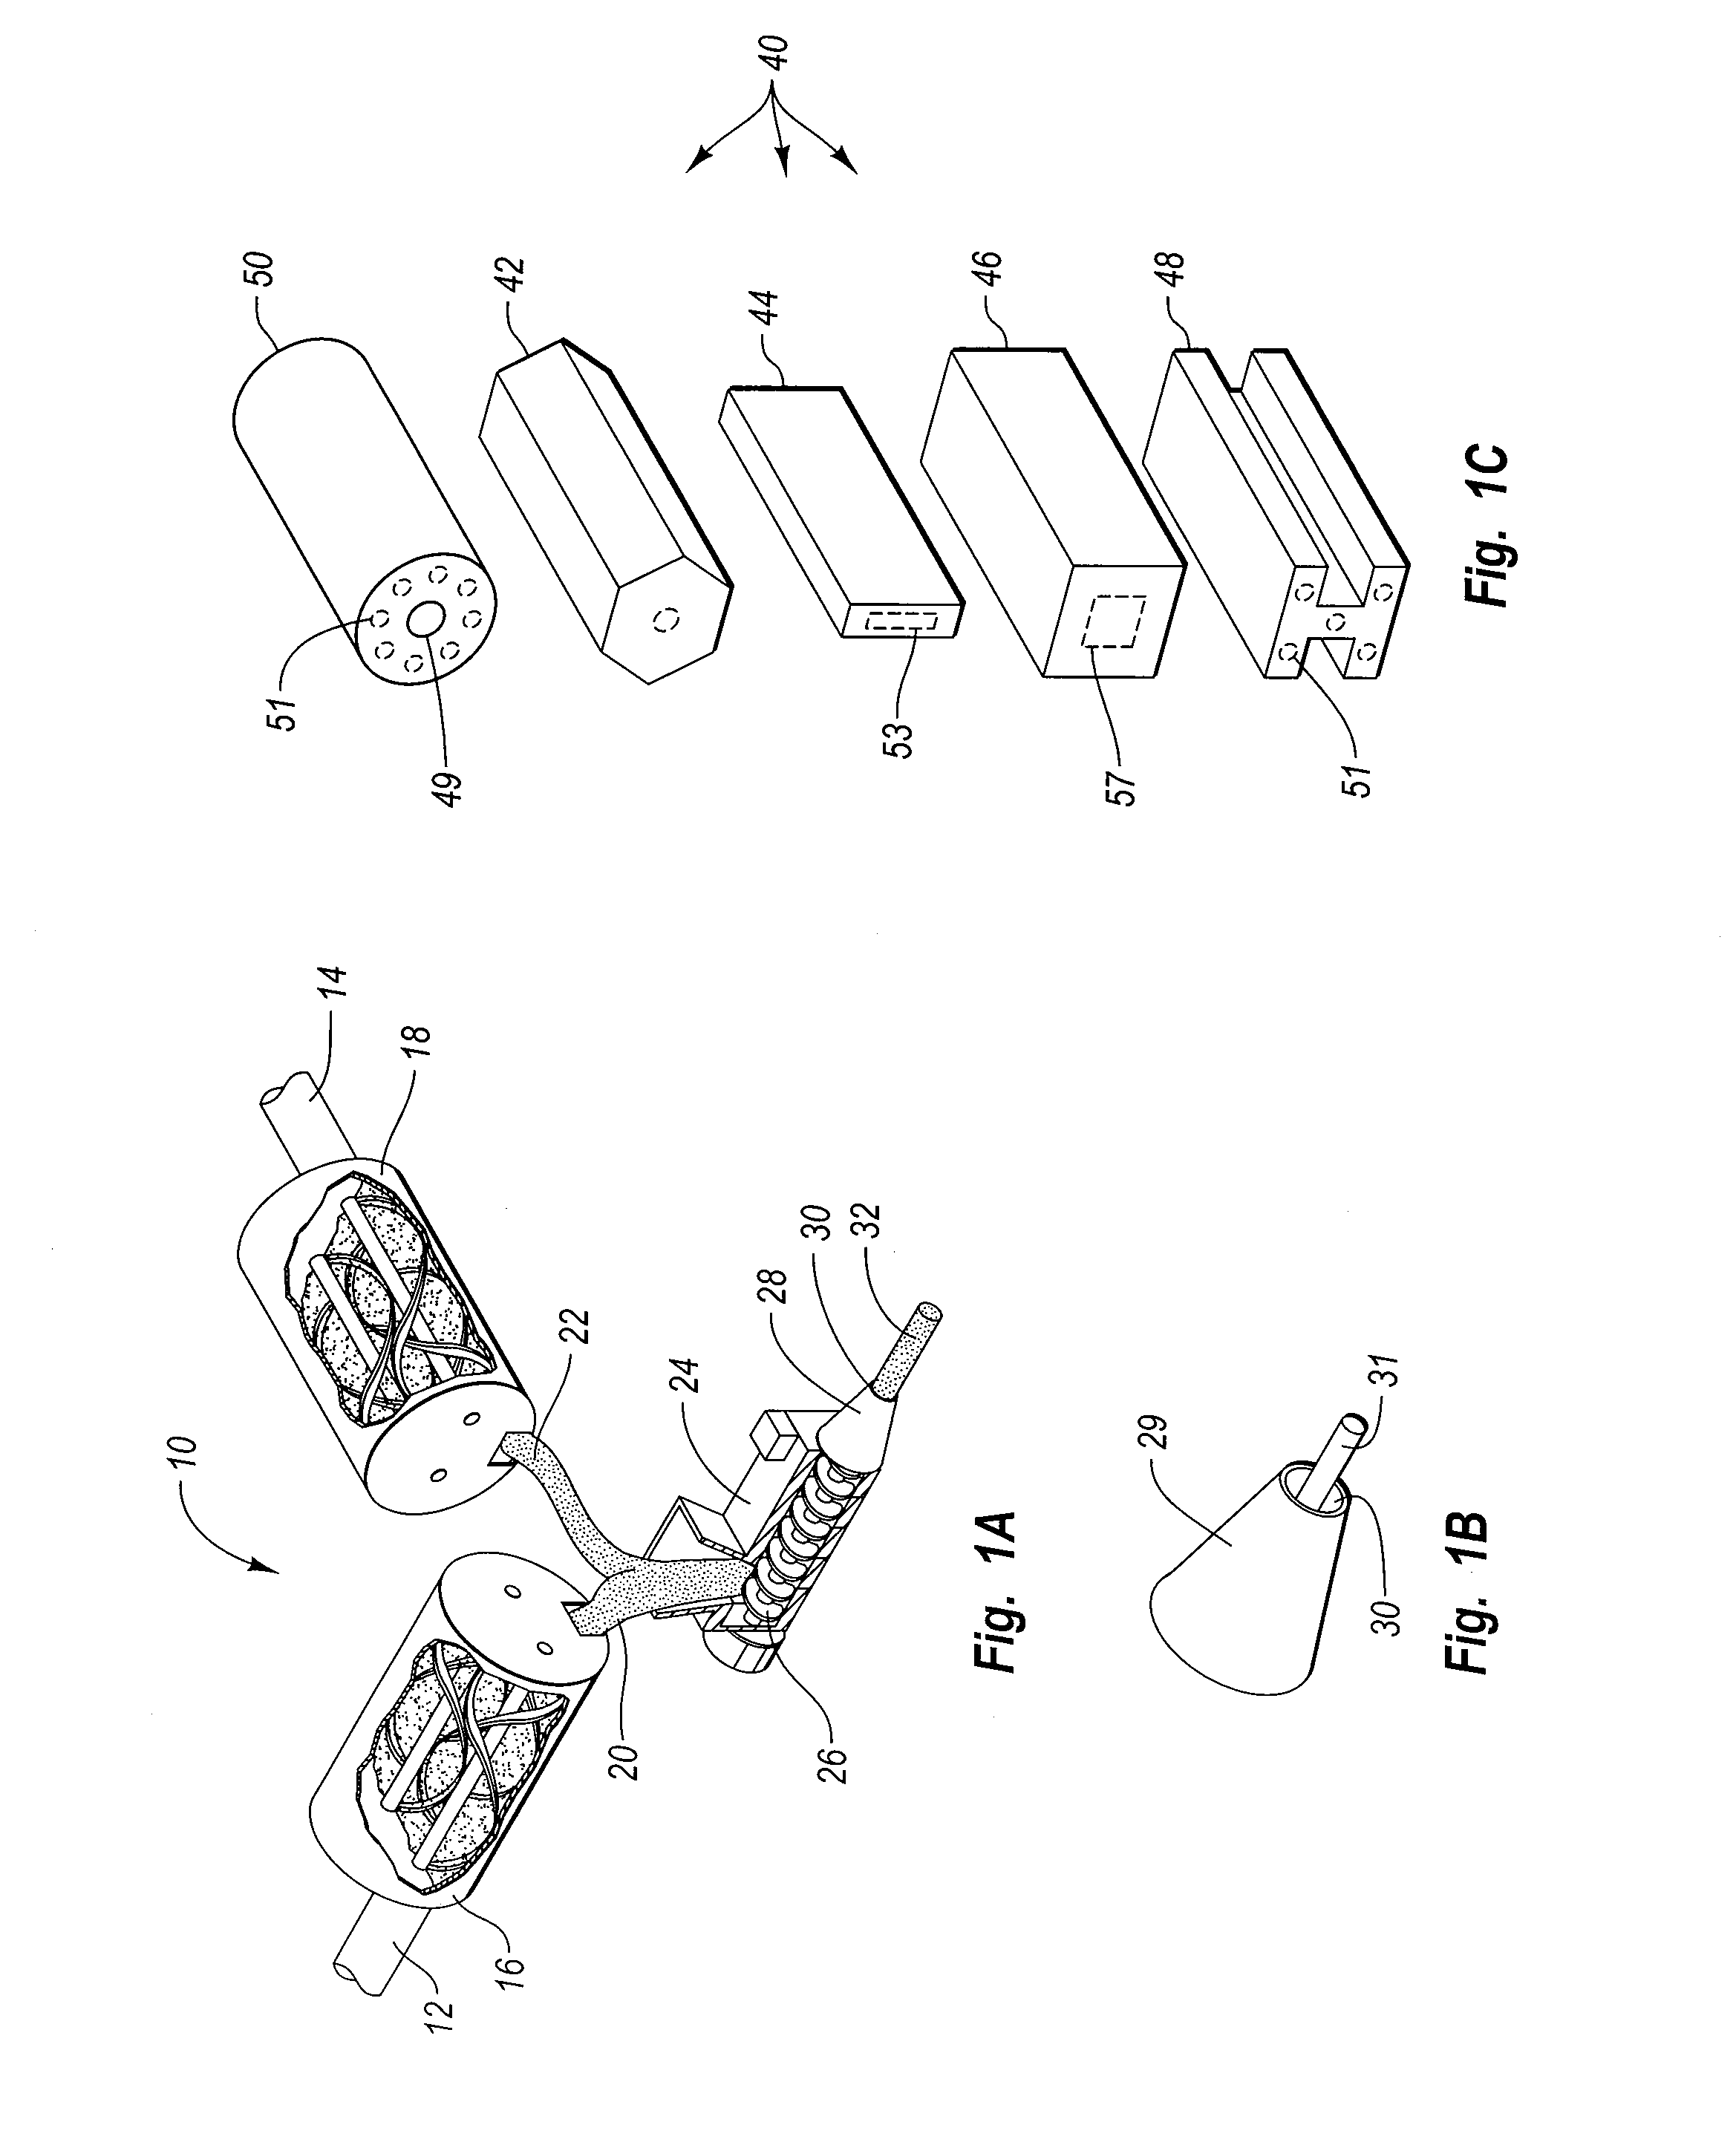 Cementitious composites having wood-like properties and methods of manufacture